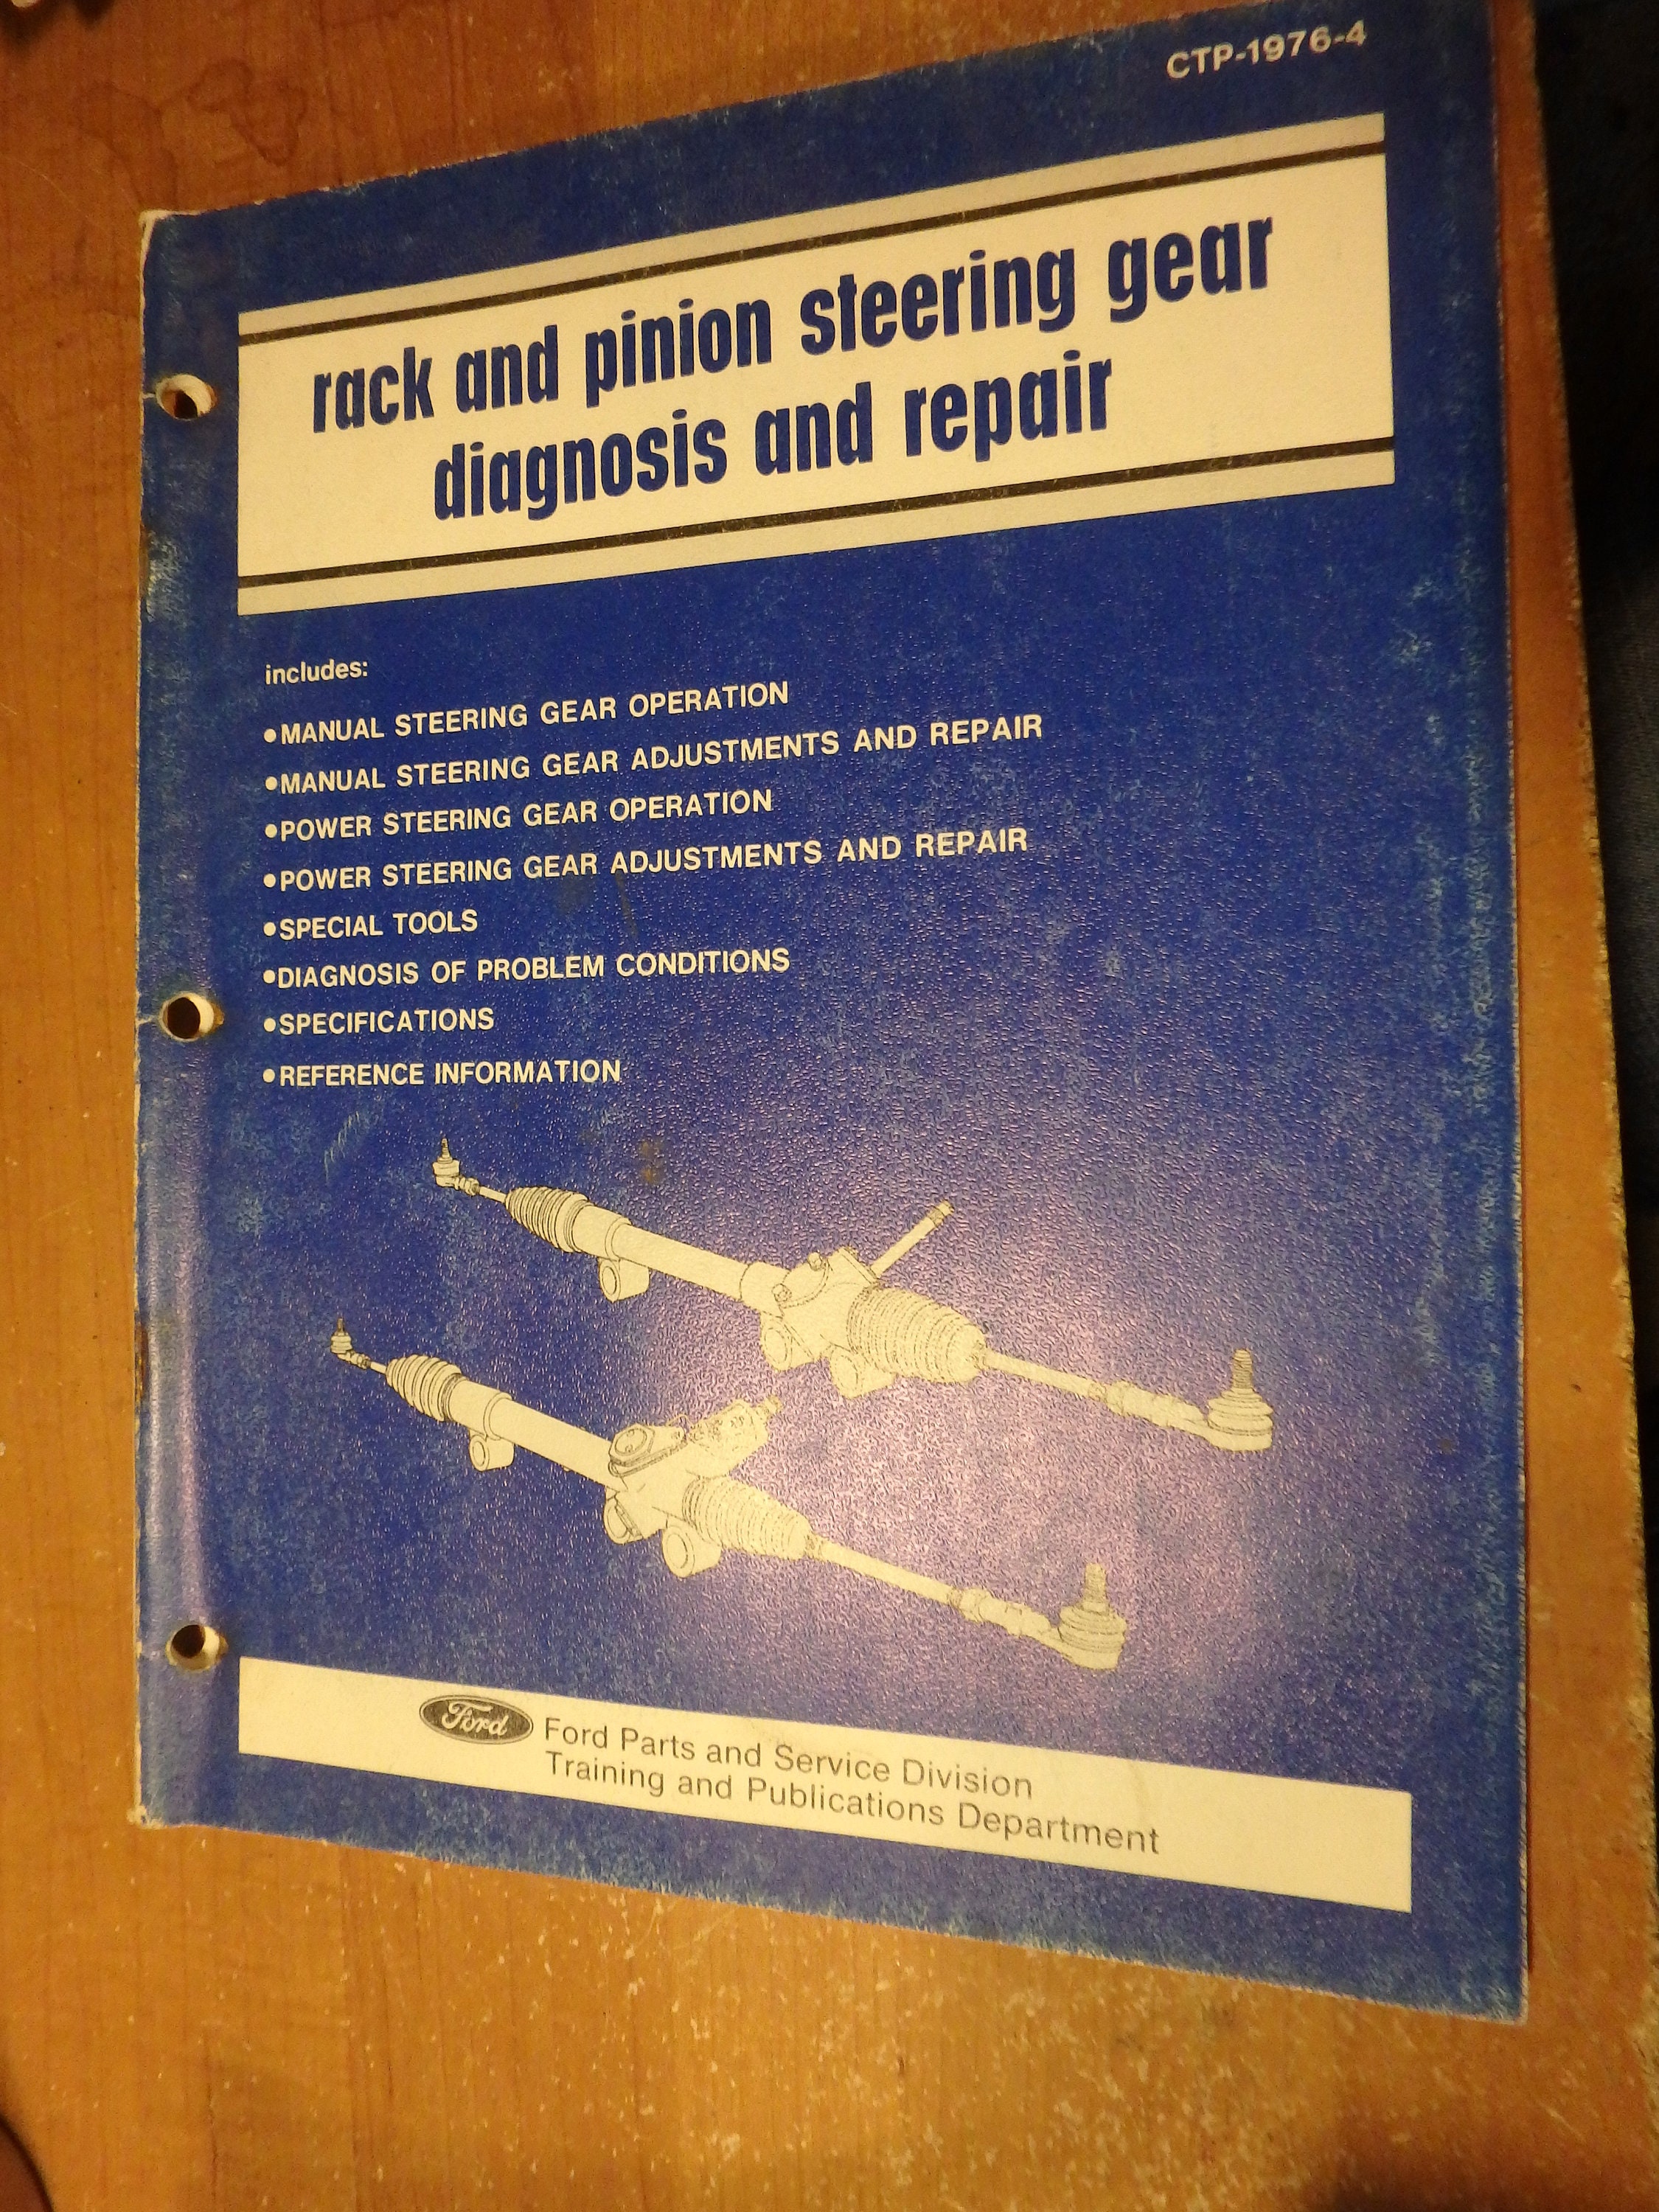 1976 Ford Training Handbook Rack and Pinion Steering Gear Diagnosis and  Repair-64 Pages 